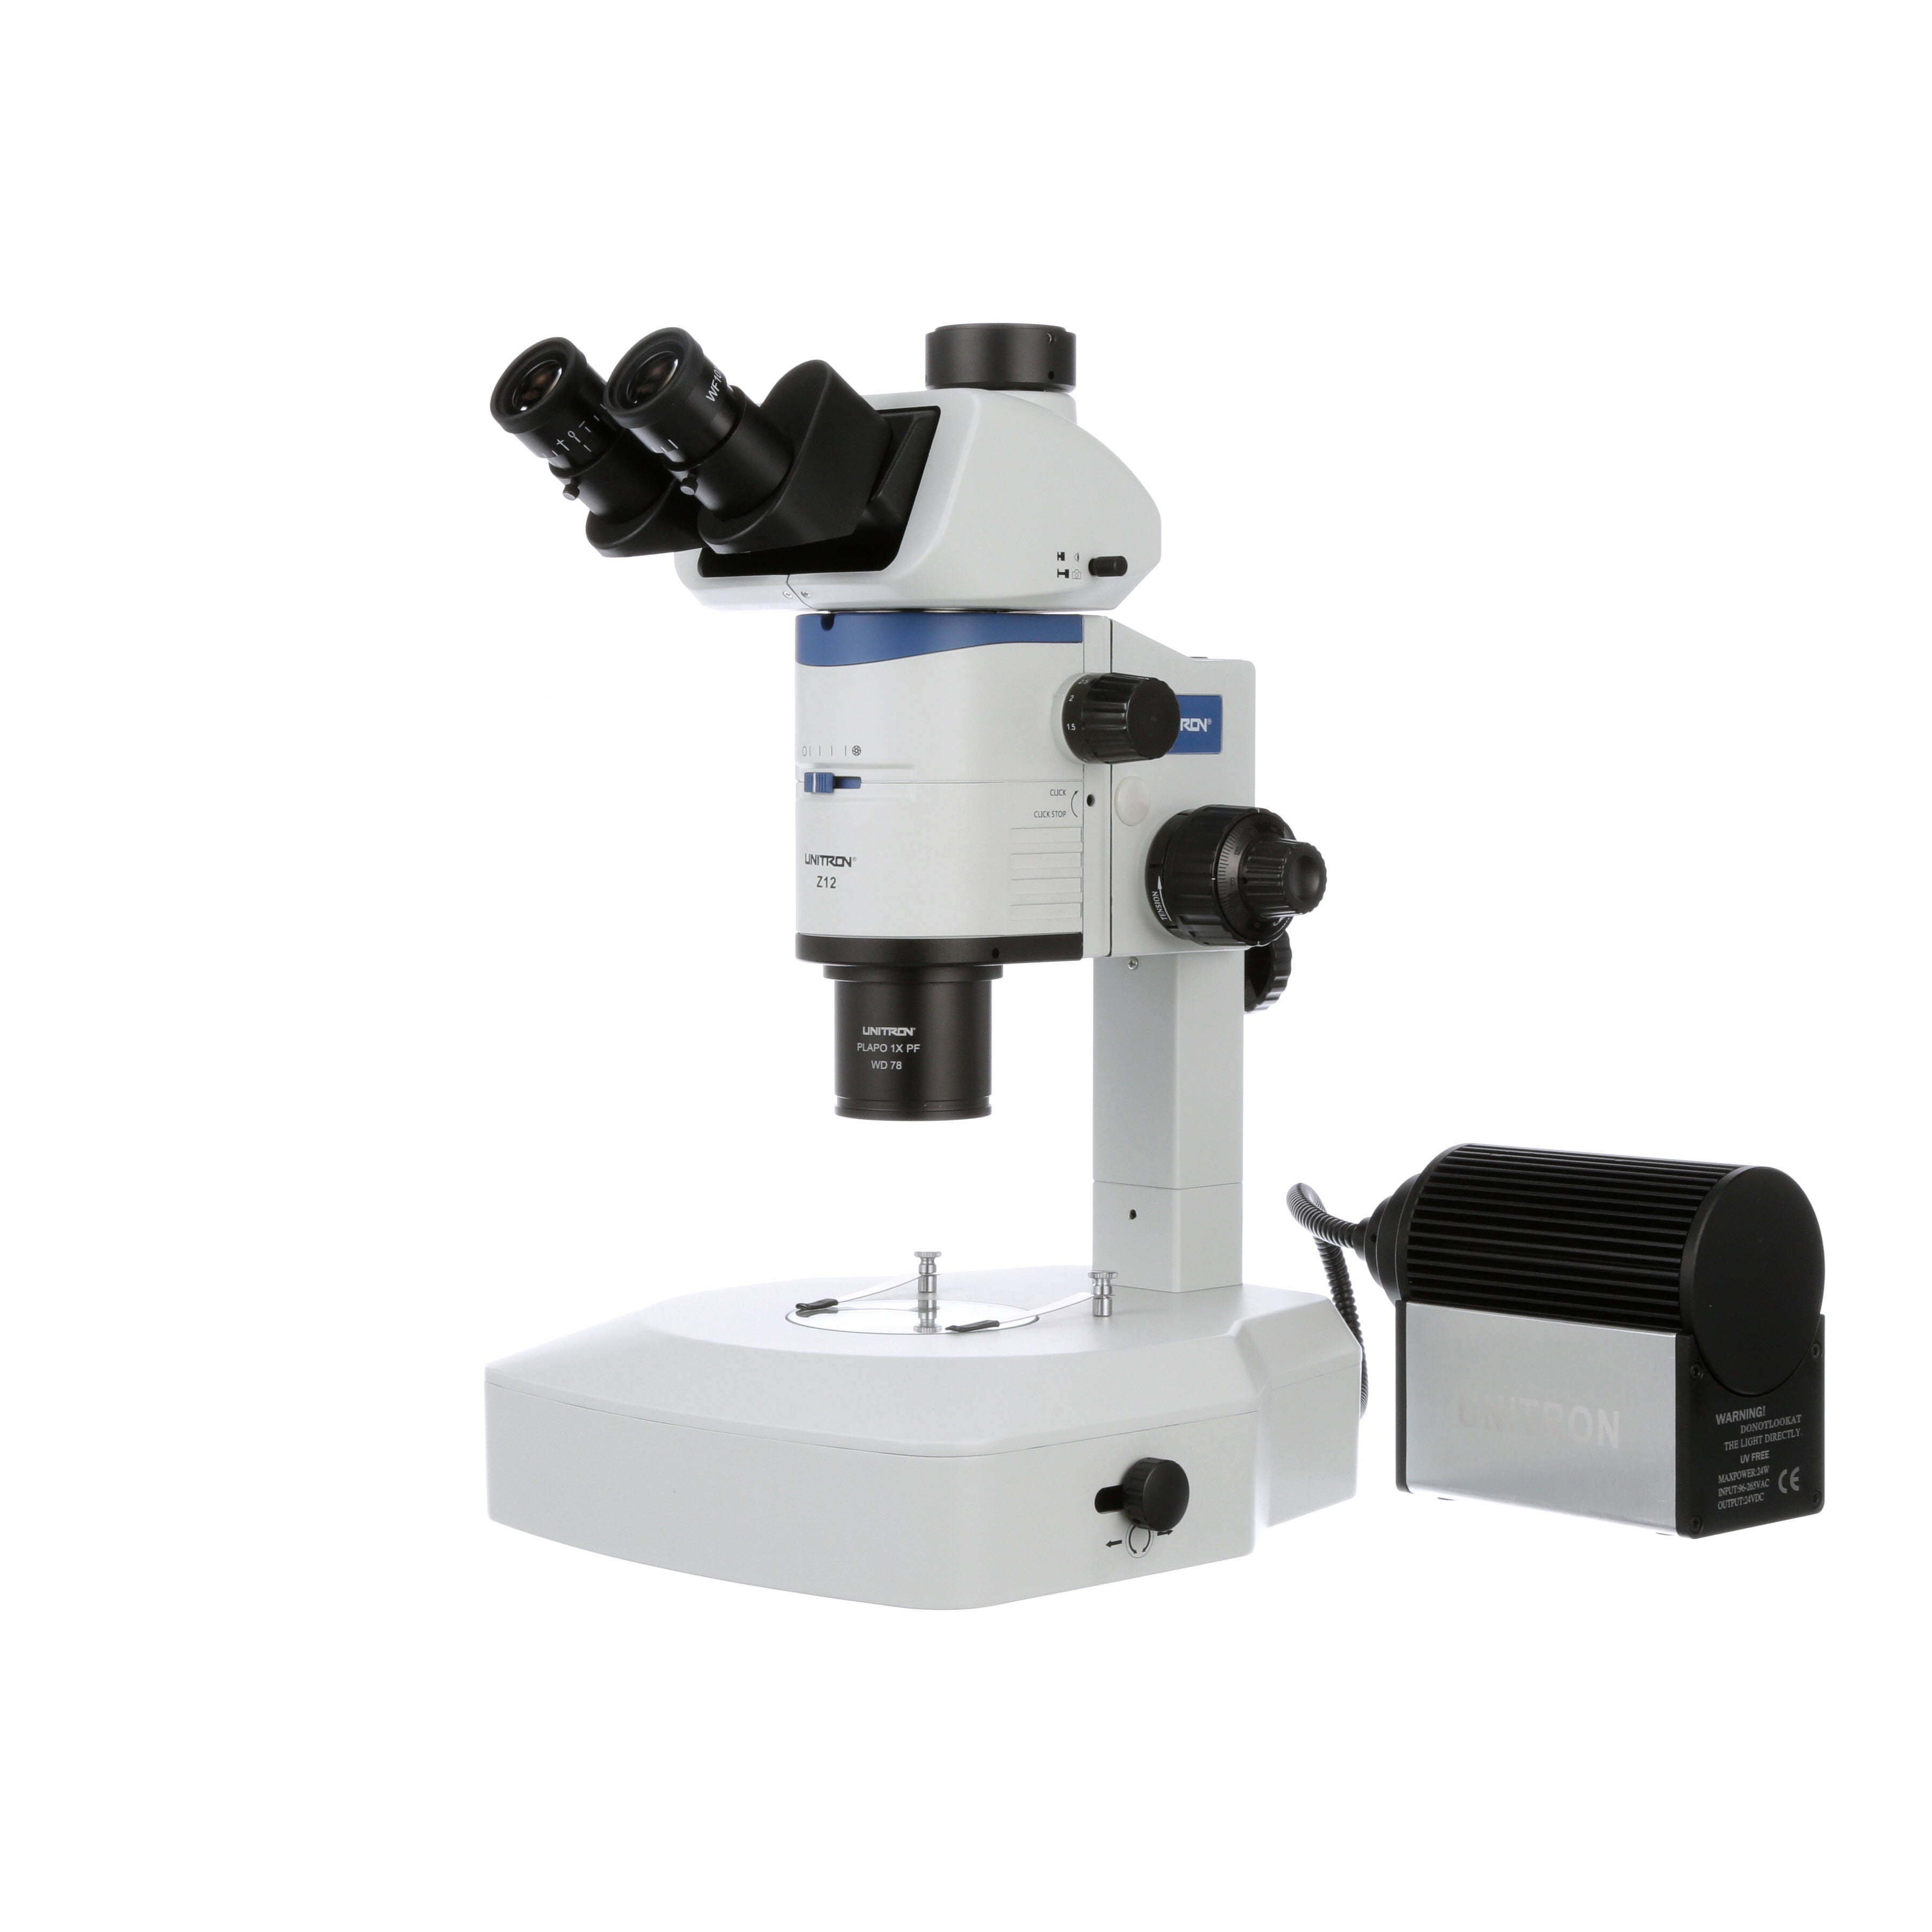 Unitron Z12 Stereo Microscope available at Meyer Instruments, Inc.